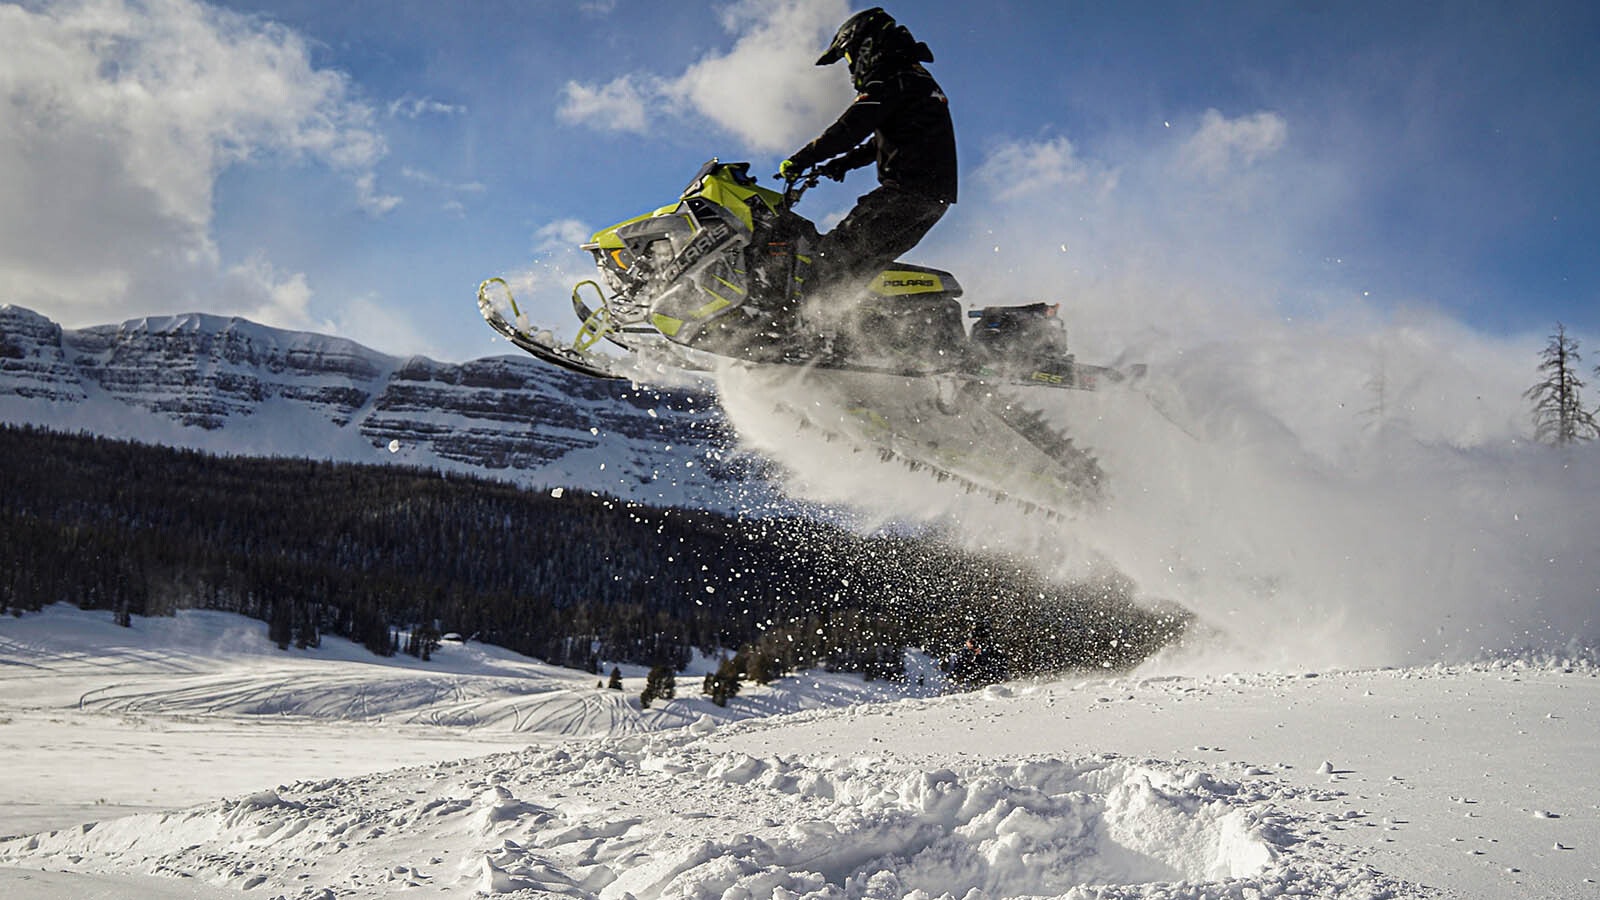 The pristine Wyoming landscape makes for a winter playground at Brooks Lake Lodge with world-class snowmobiling.